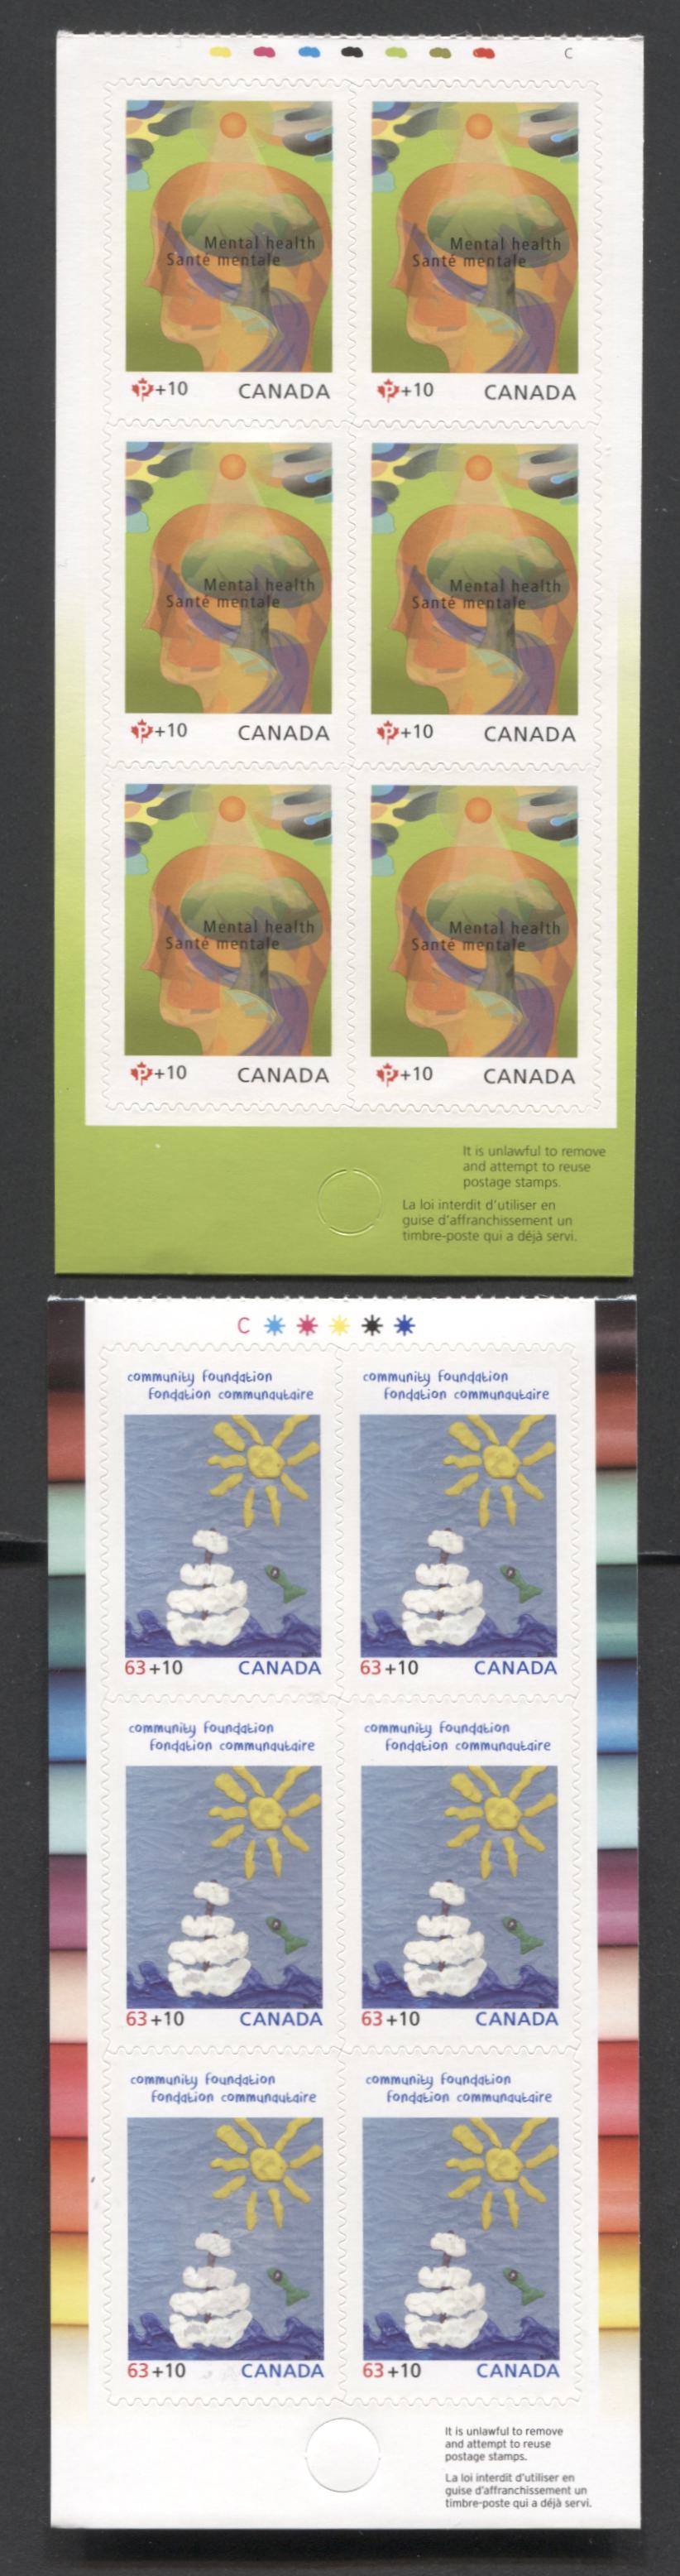 Lot 40 Canada #B15, B20 P(54c & 63c)+10 Multicolored Natural Scenery & Floating Adrift, 2009 & 2013 Mental Health & Canada Post Community Foundation Semi Postals, 2 VFNH Booklet Panes Of 6 With Inscription